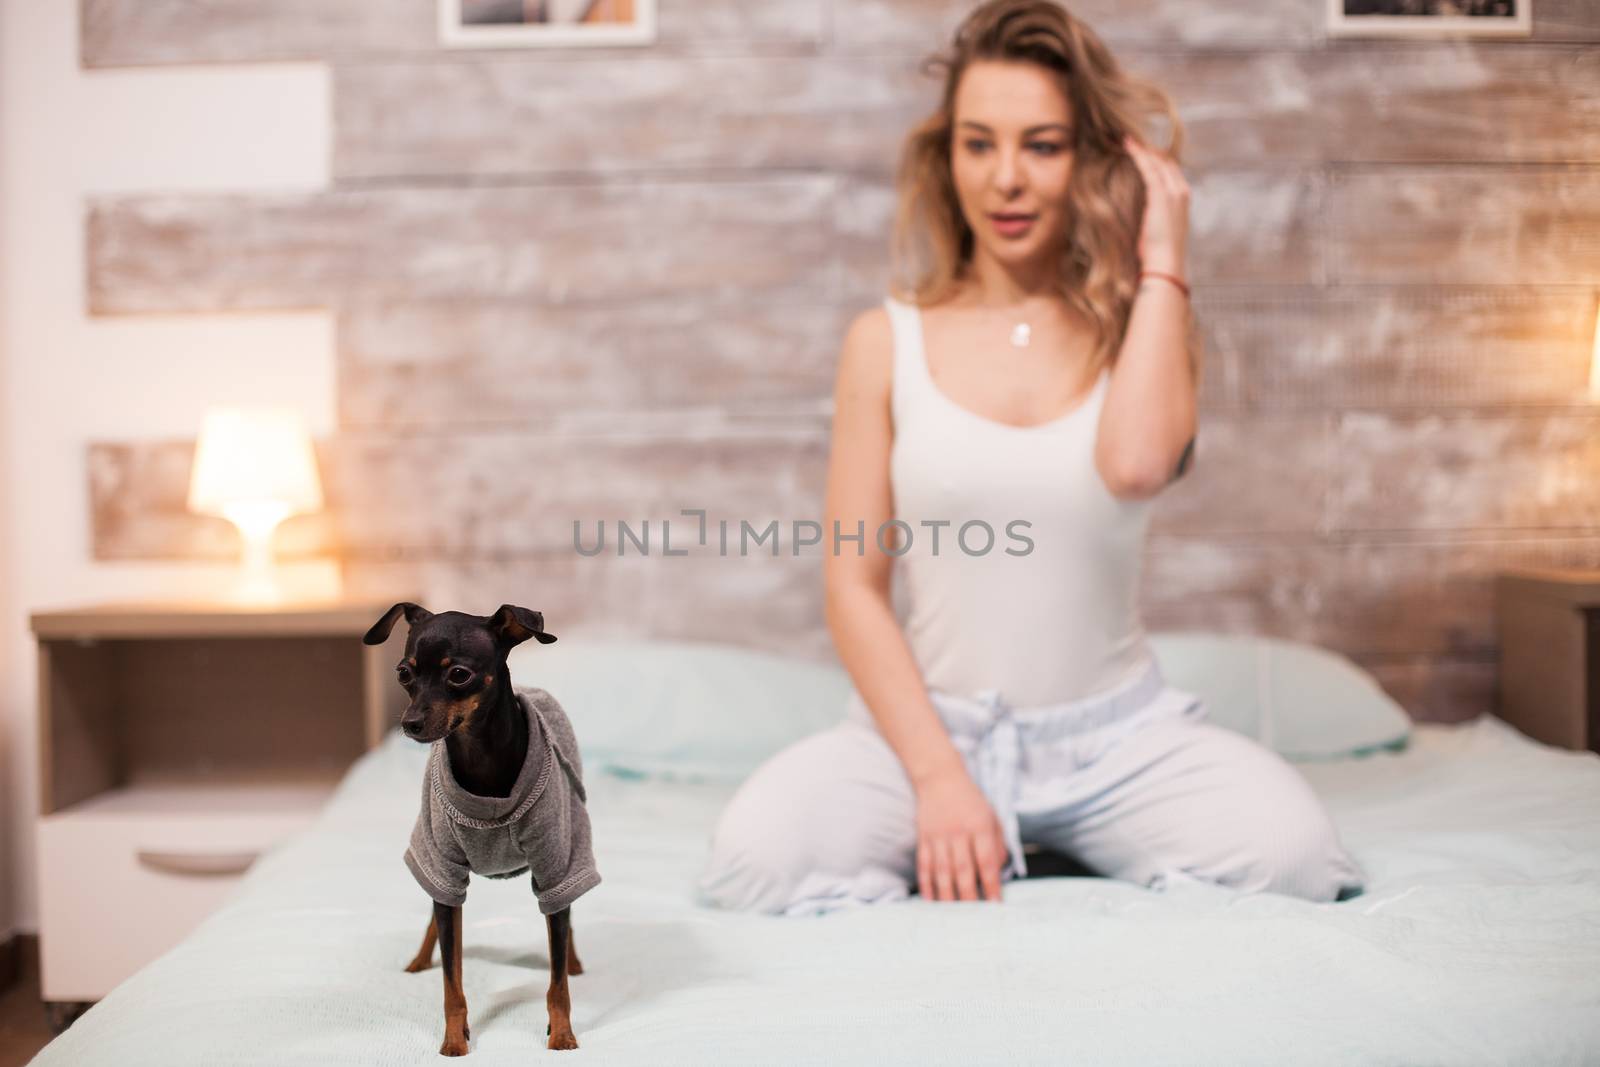 Playful little dog sitting on bed at night by DCStudio